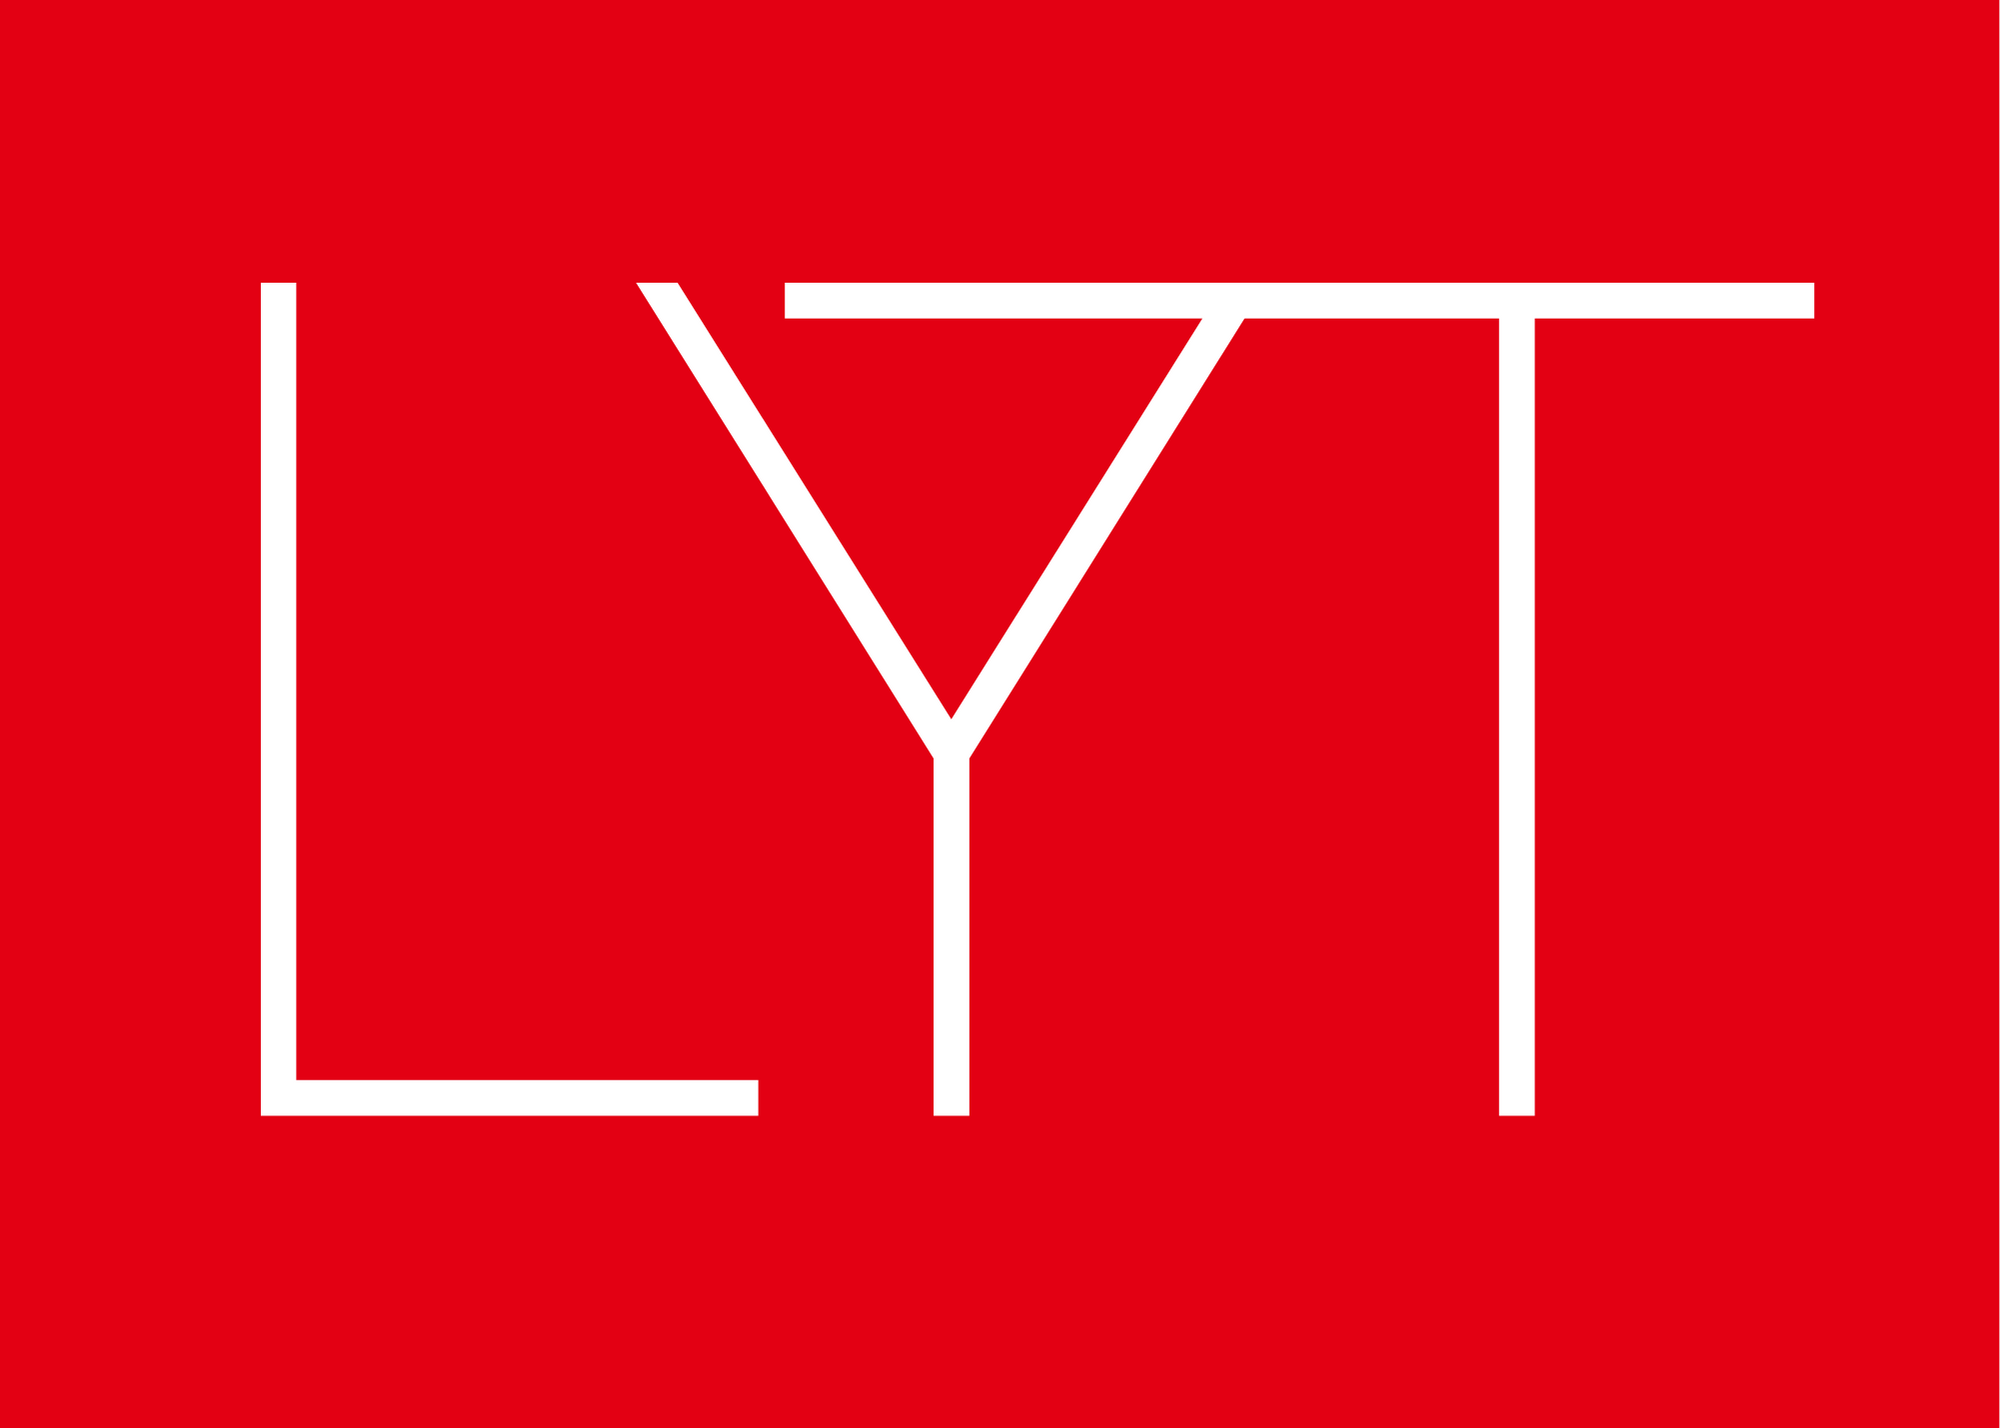 LYT Consulting